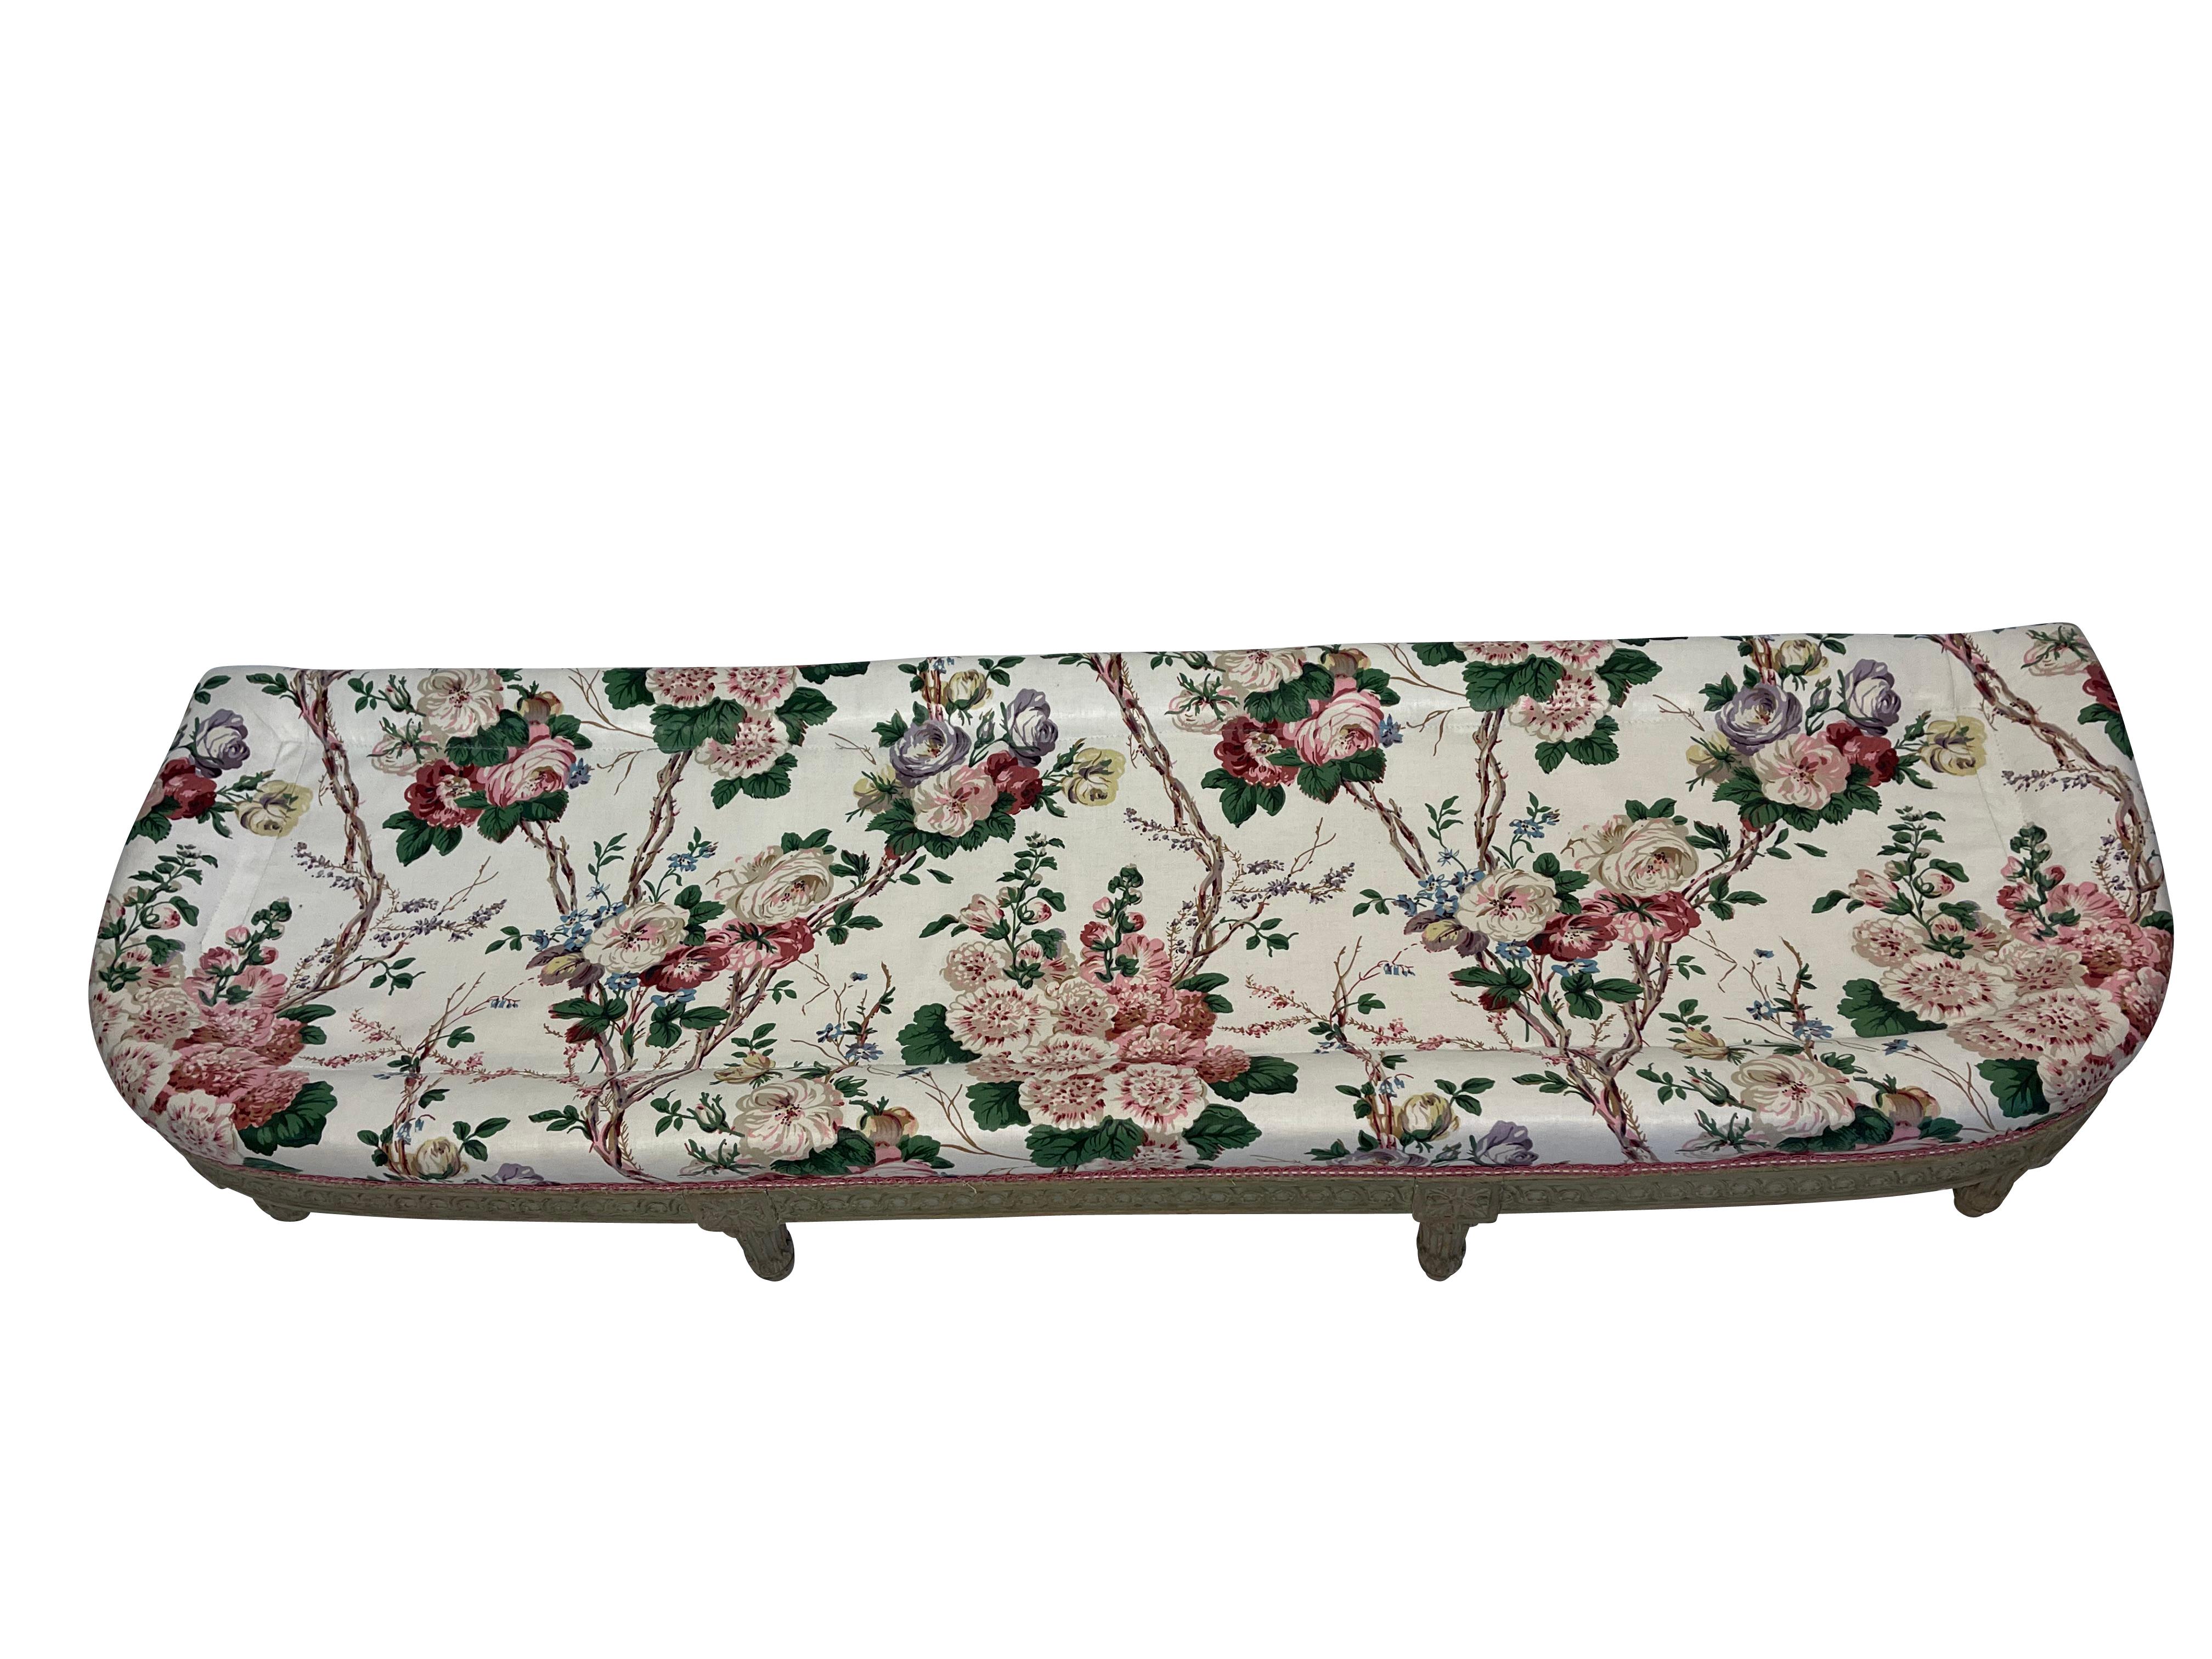 Grey-painted Louis XVI-style curved end of bed or fireside bench ready to be reupholstered in your choice of fabric.  It is upholstered in a polished chintz with a large goose-down pillow on top. The curved design has a straight back to fit against